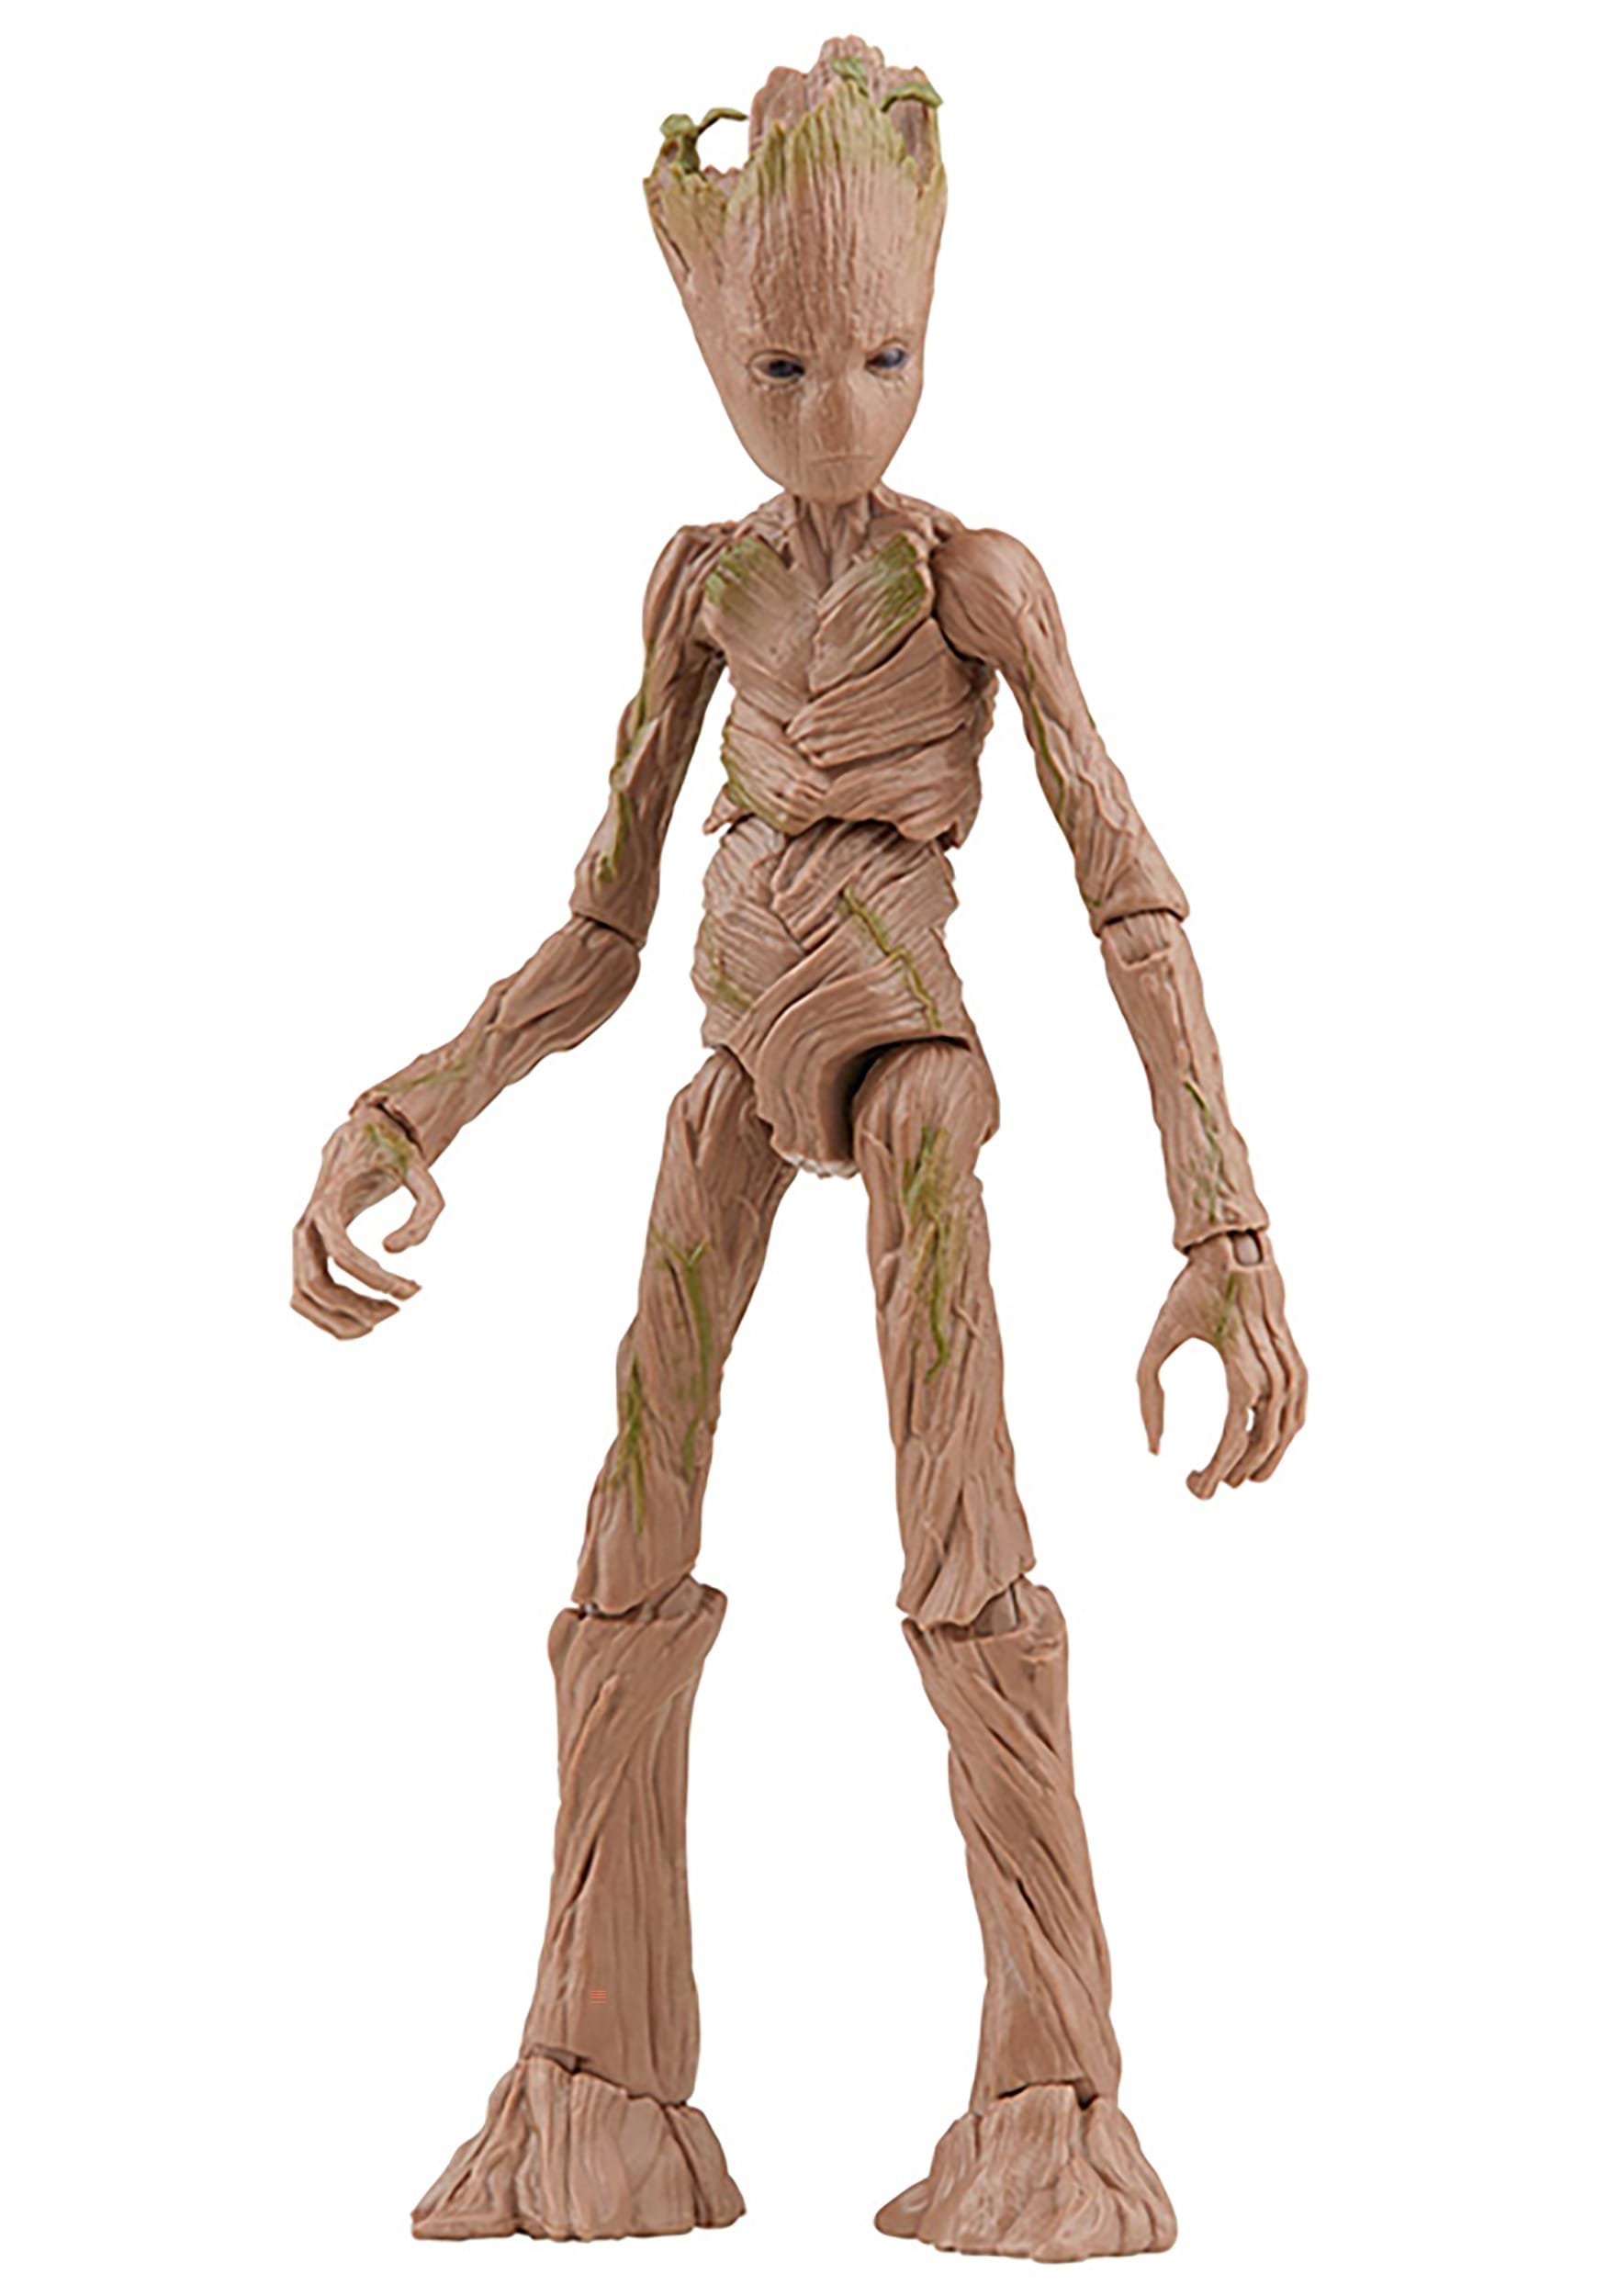 Thor: Love and Thunder Marvel Legends Groot 6" Action Figure